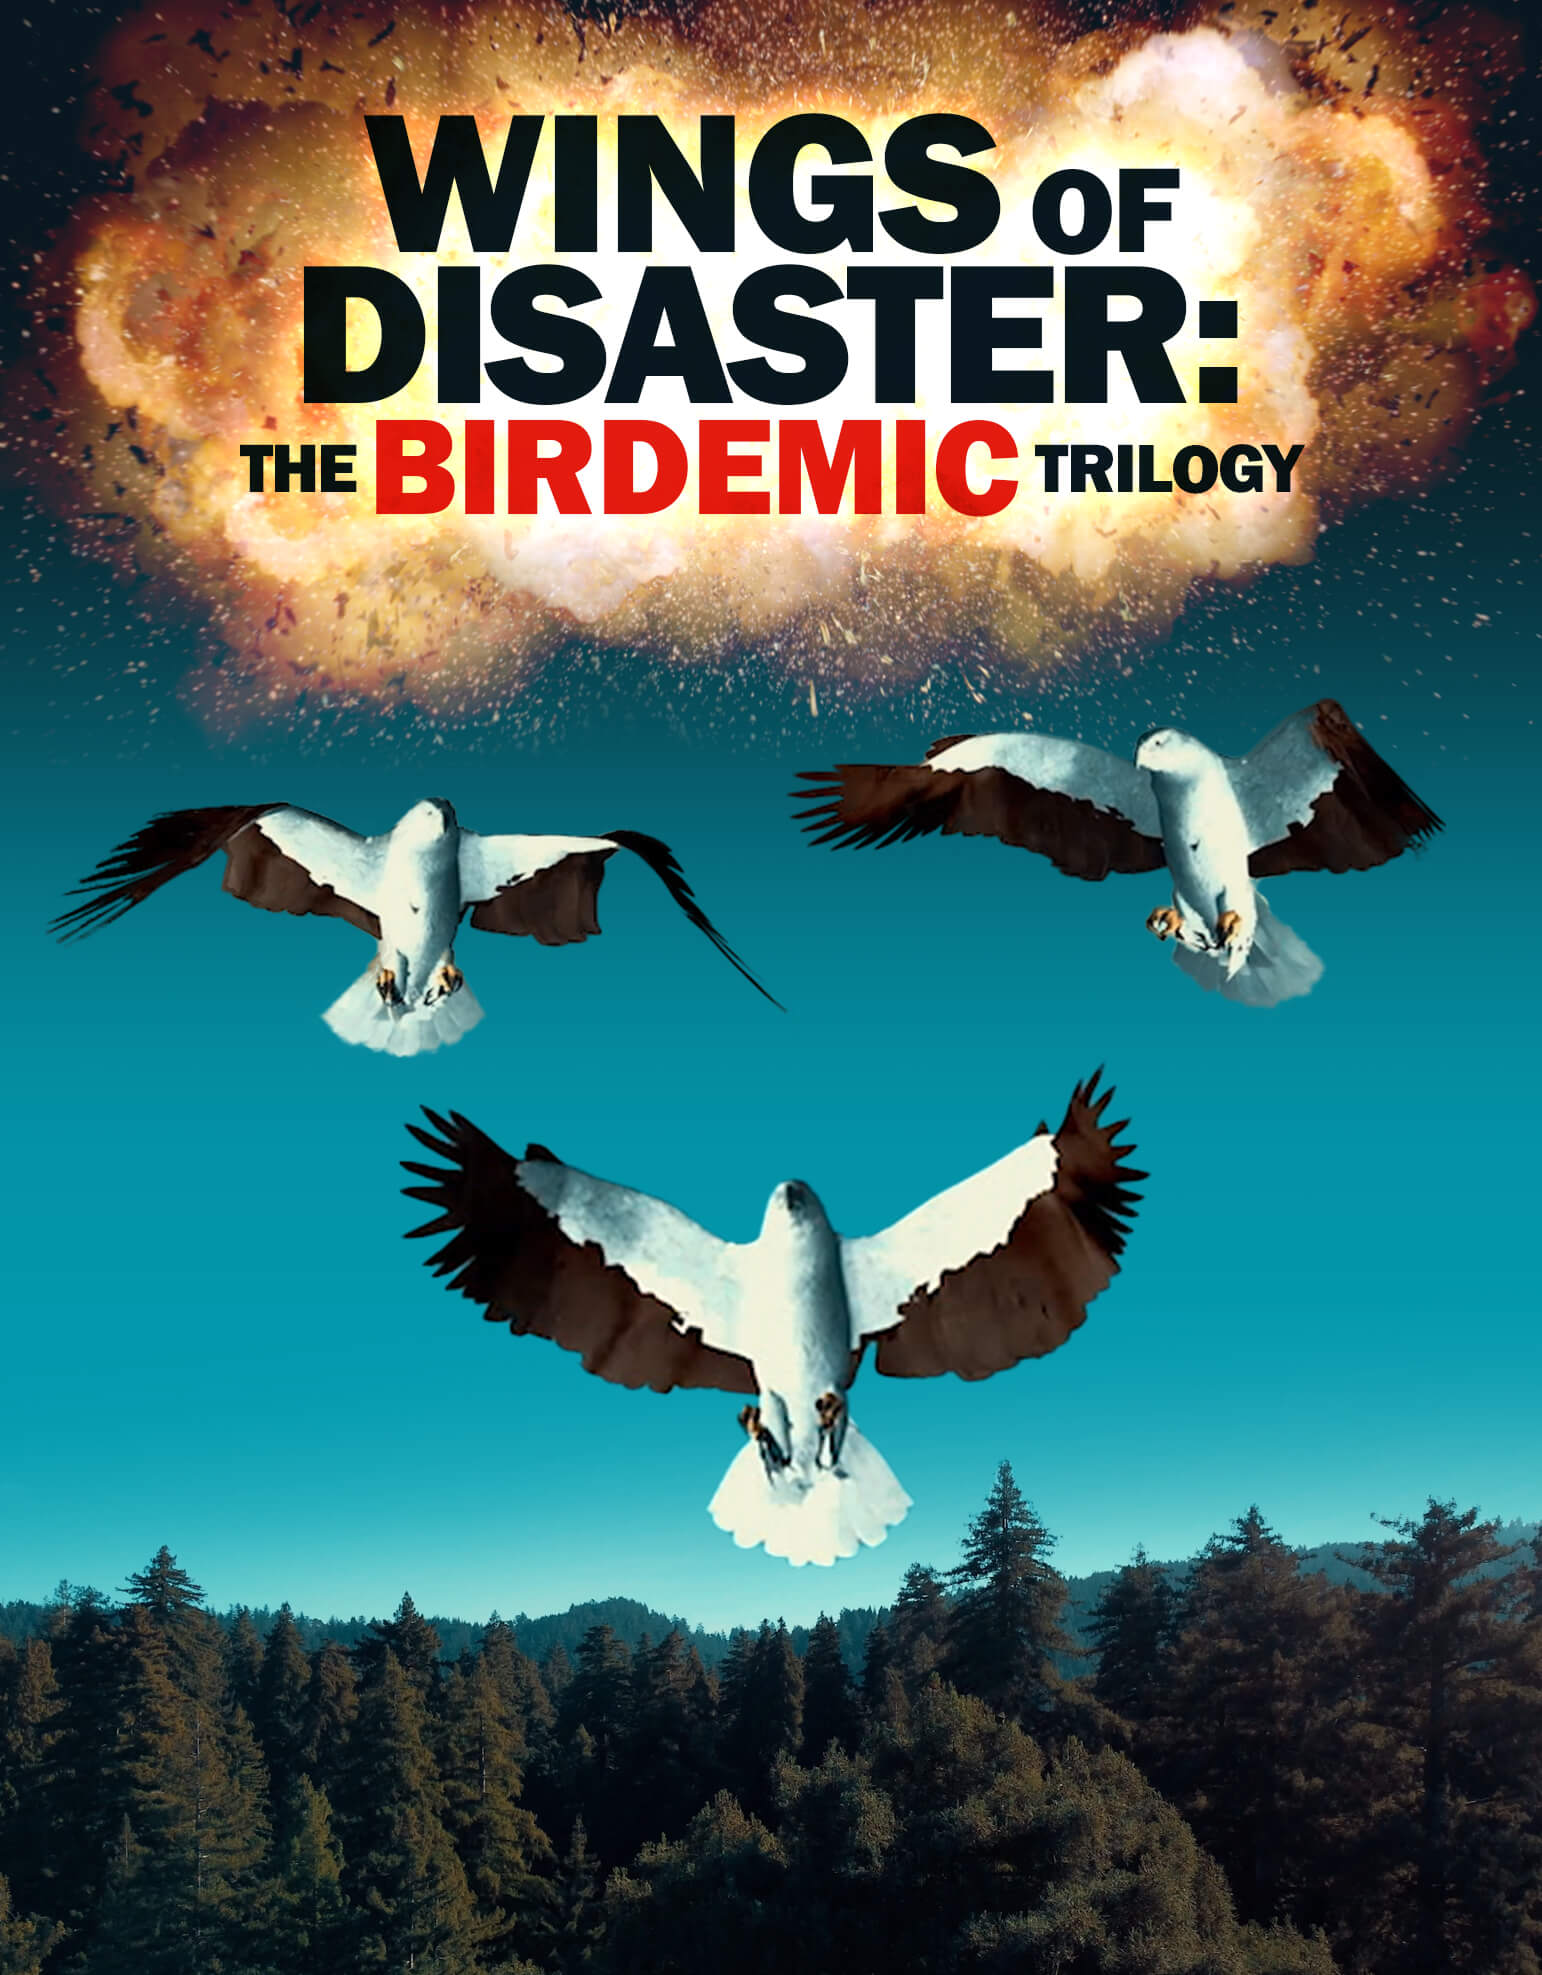 WINGS OF DISASTER: THE BIRDEMIC TRILOGY BLU-RAY